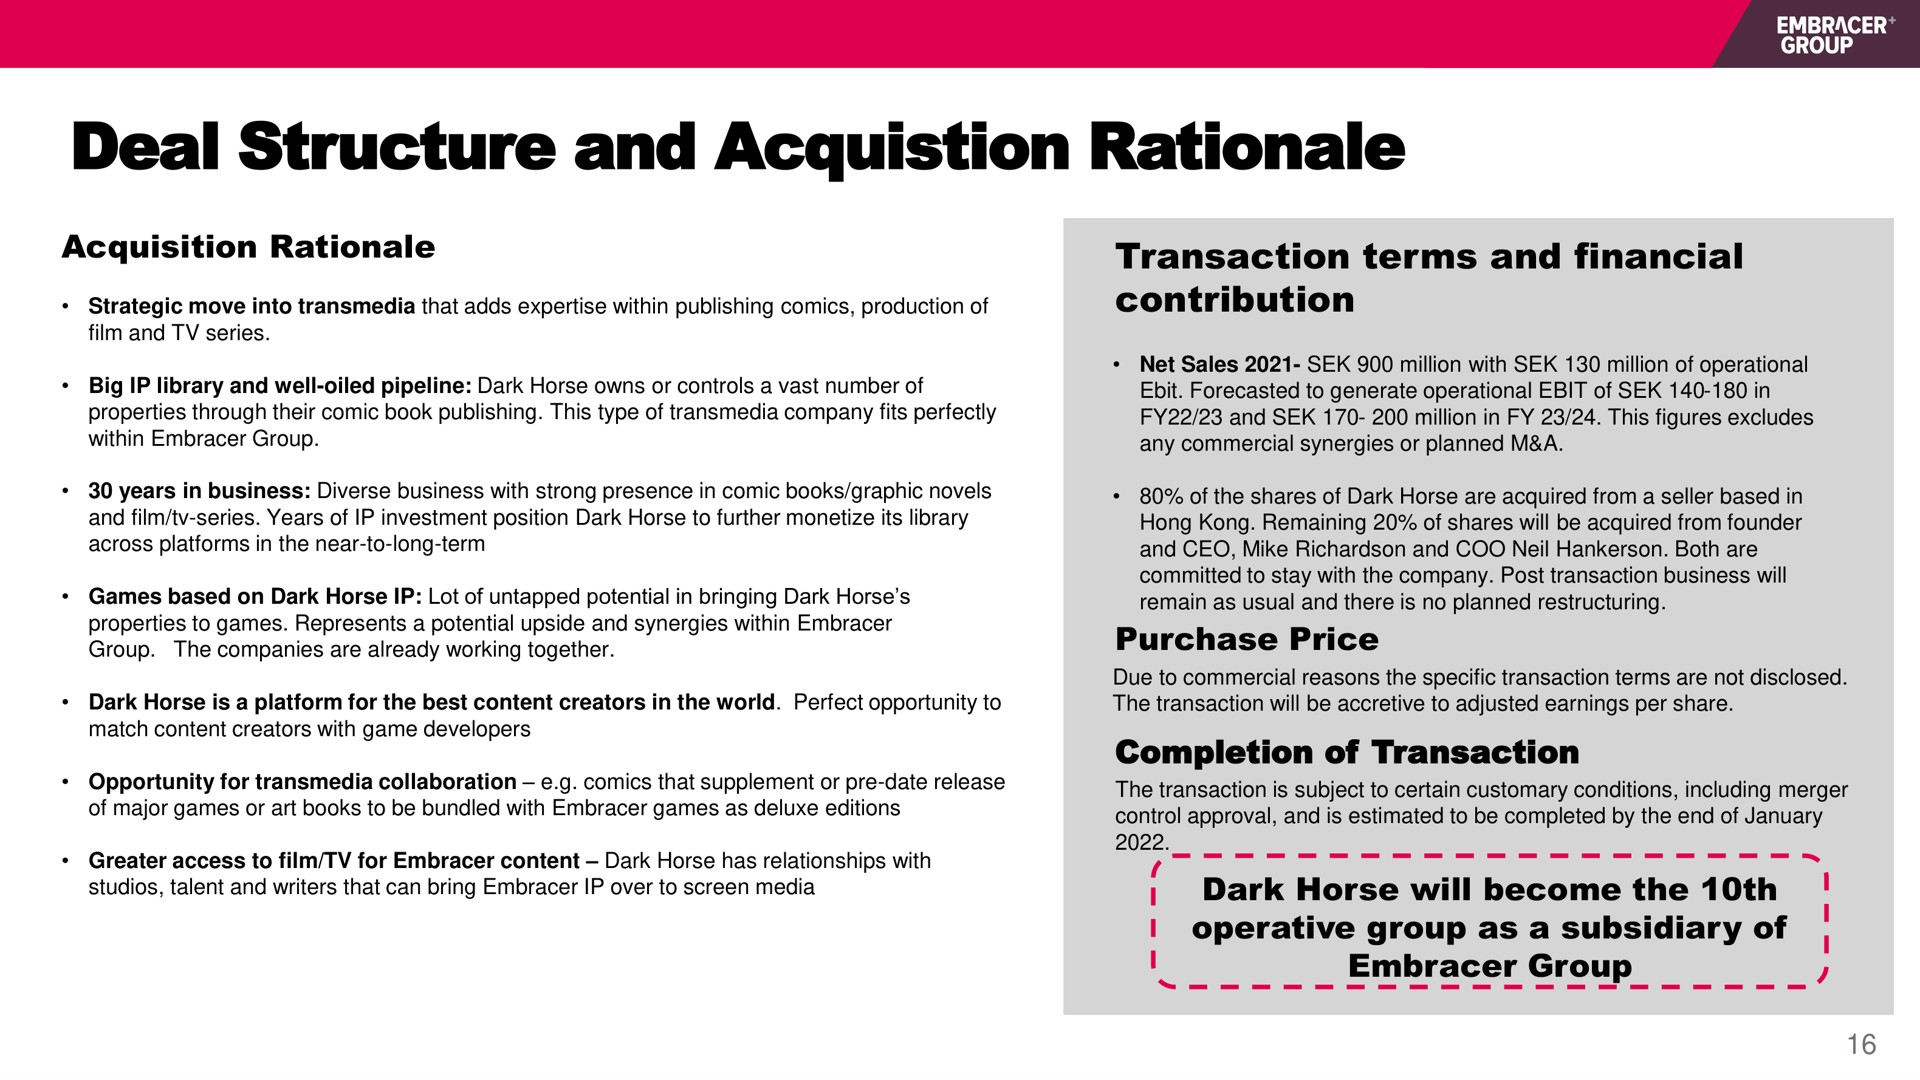 deal structure and rationale | Embracer Group